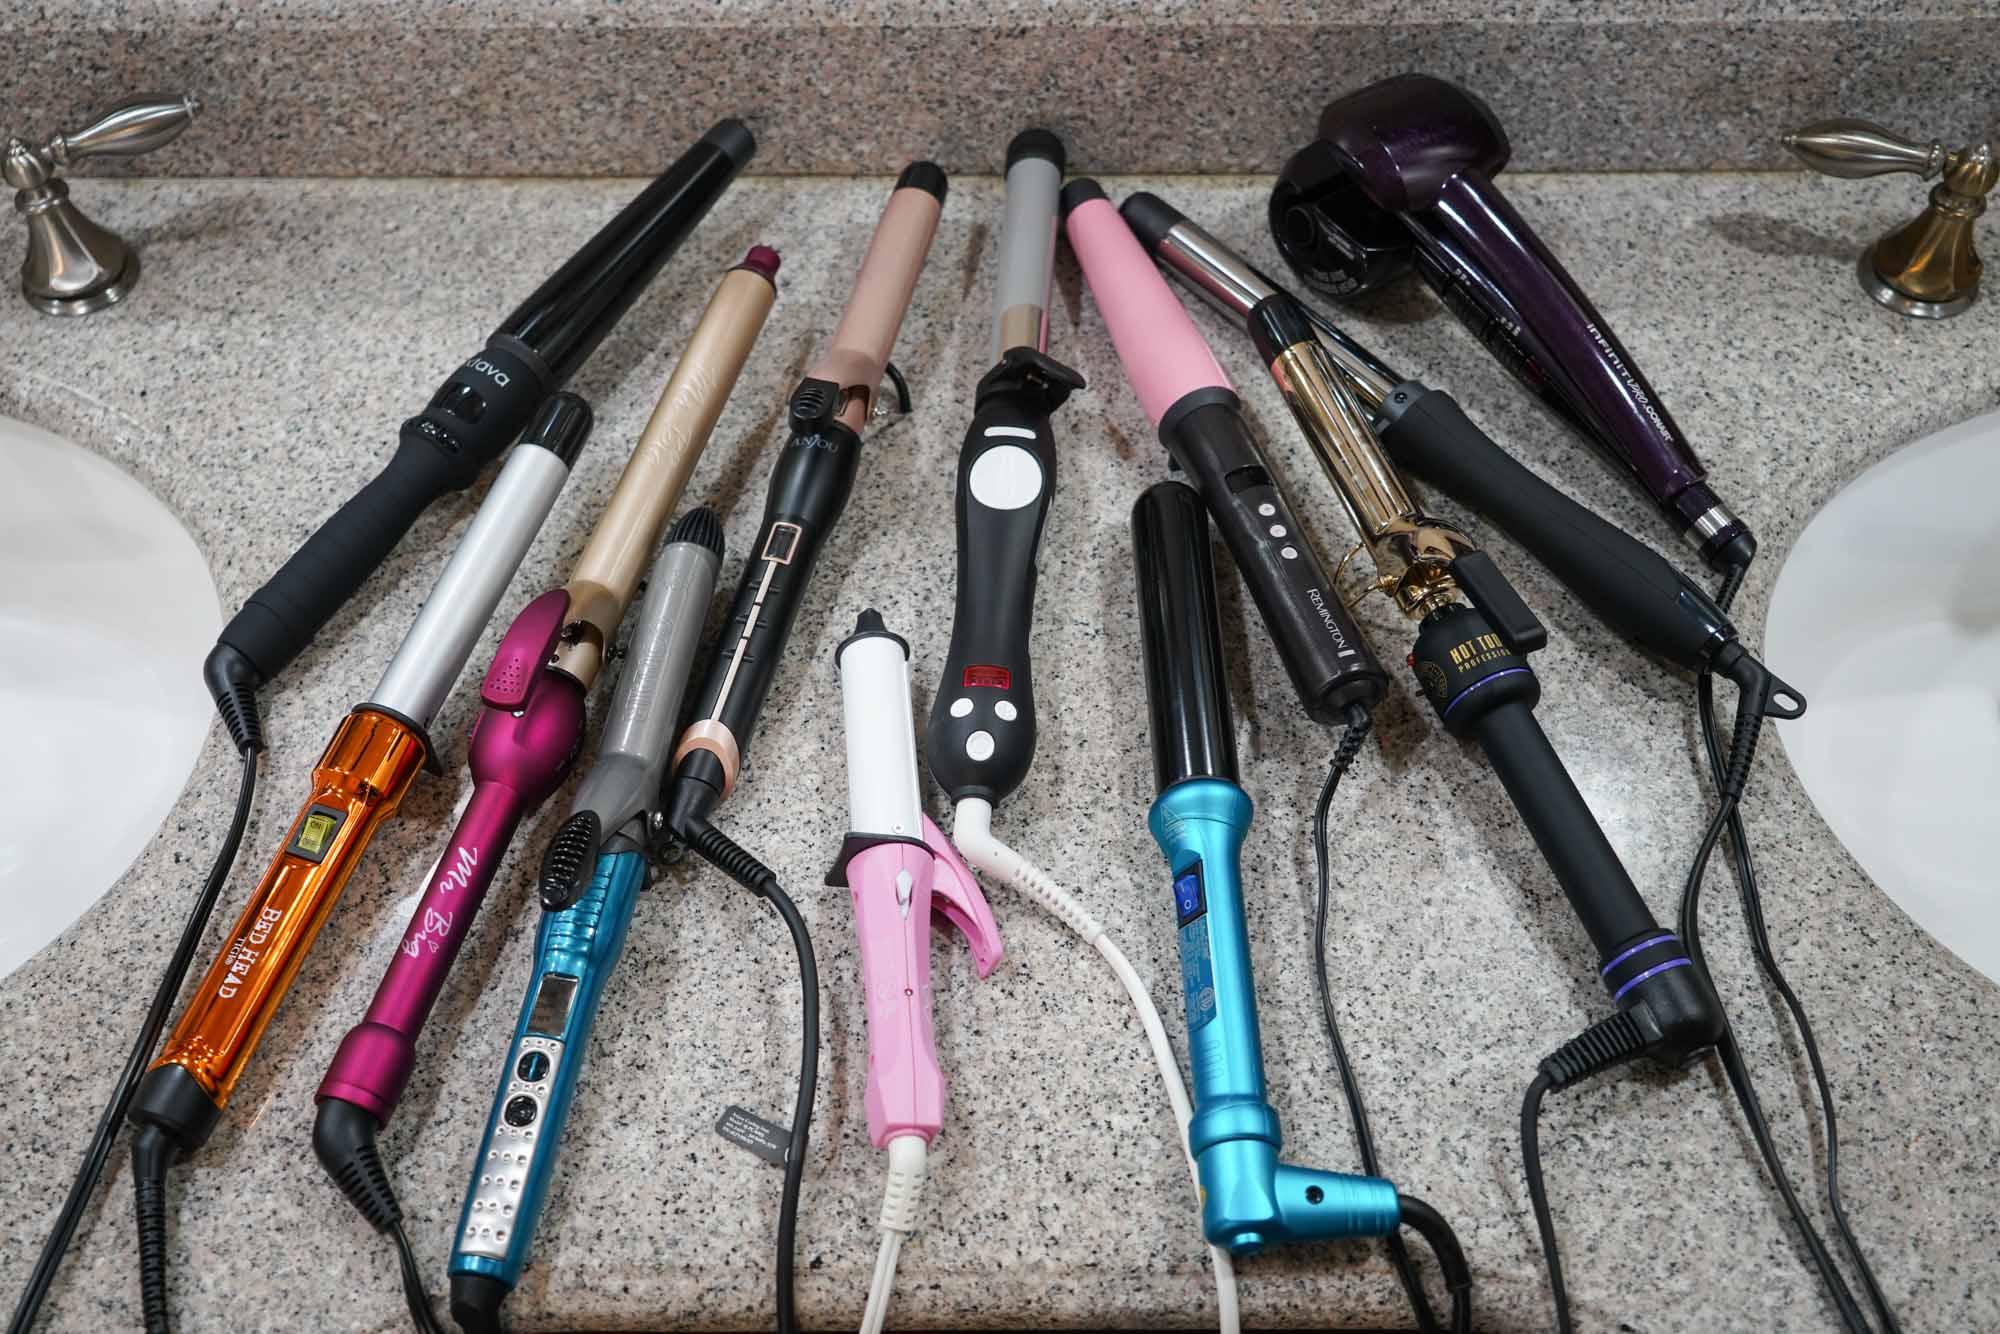 Assorted curling irons on countertop